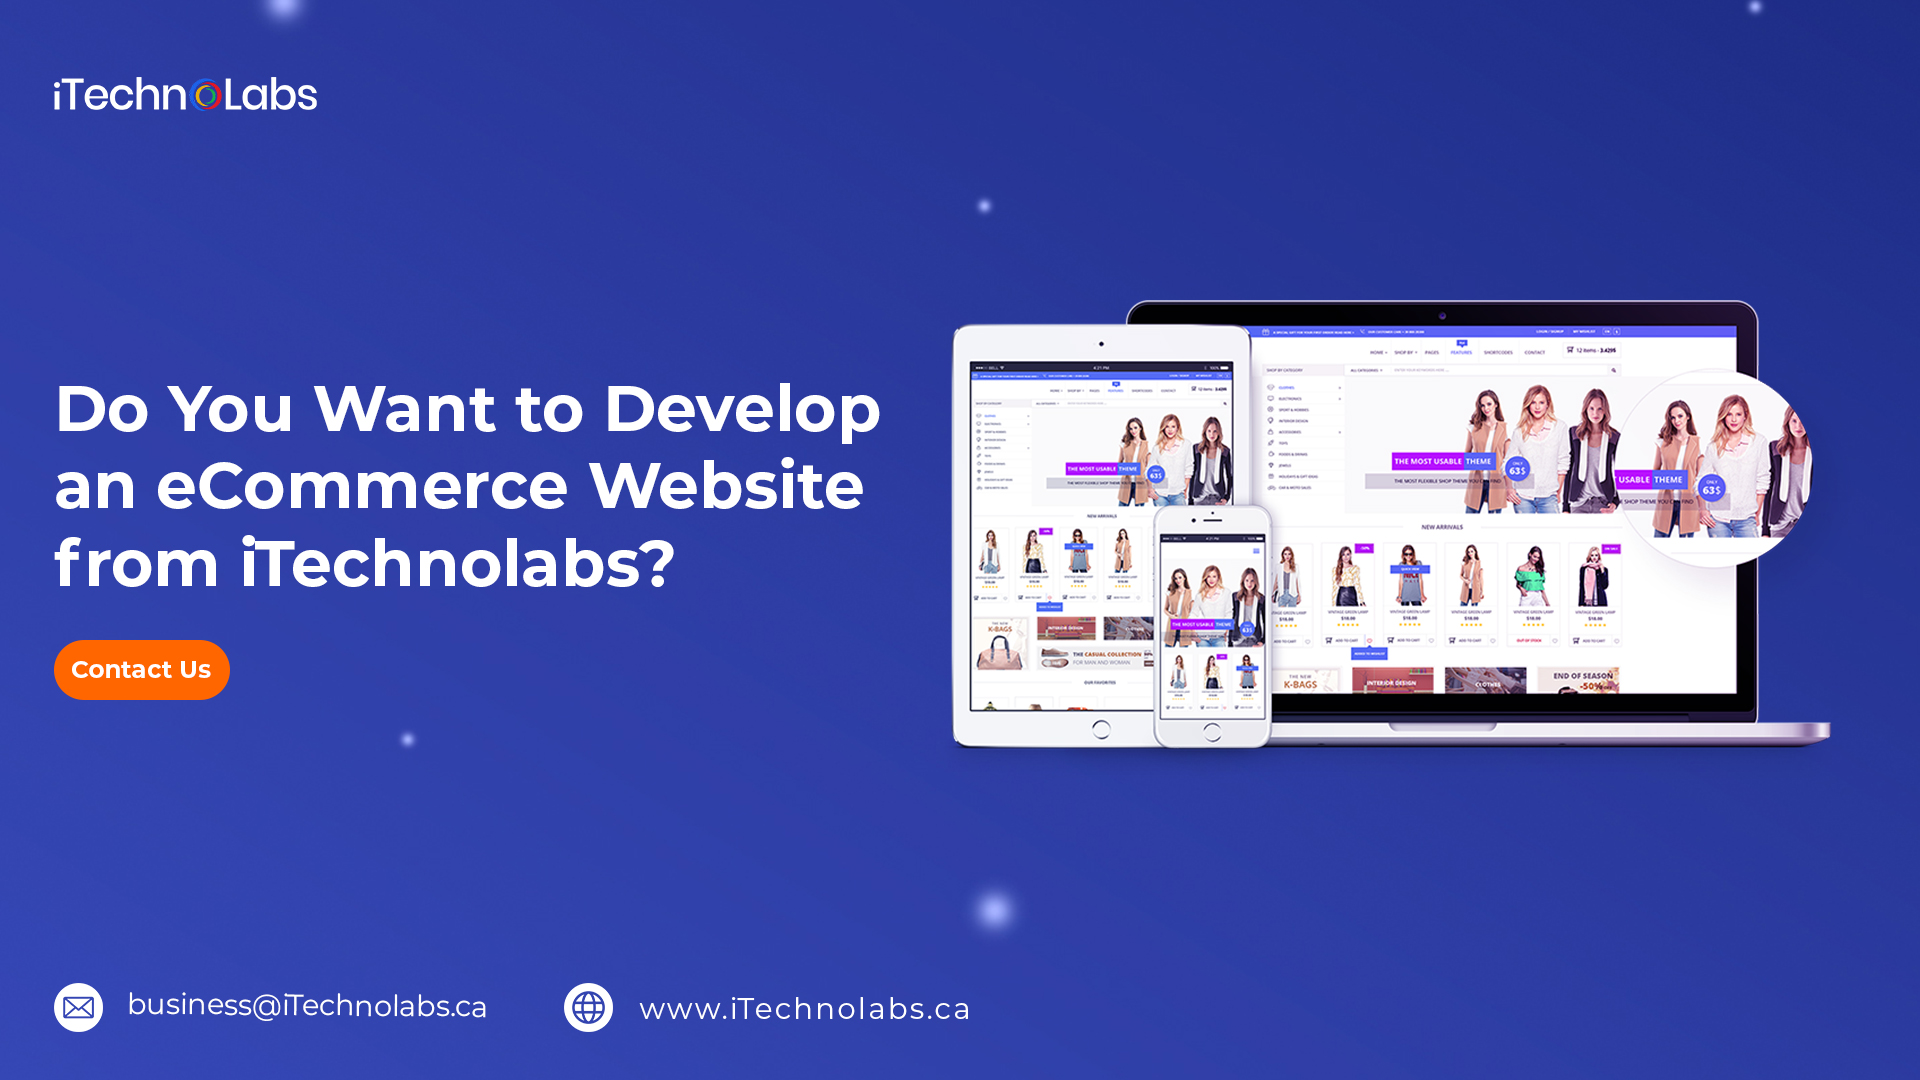 do you want to develop an ecommerce website from itechnolabs